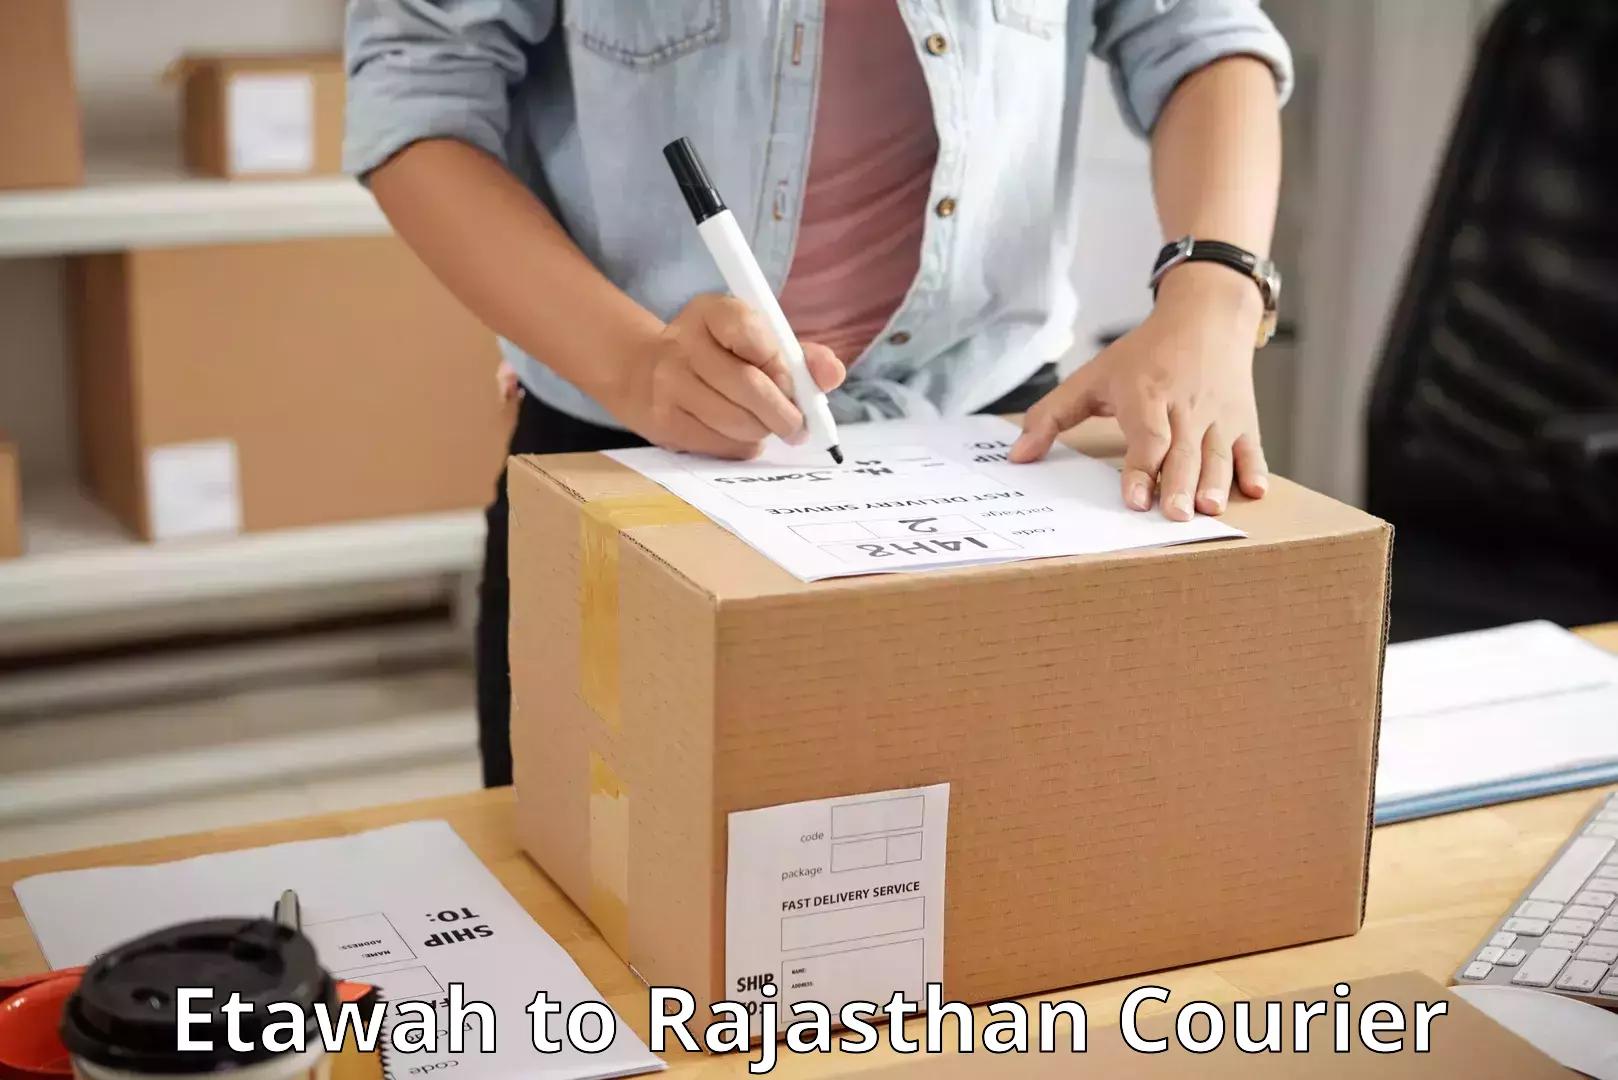 State-of-the-art courier technology Etawah to Sikar